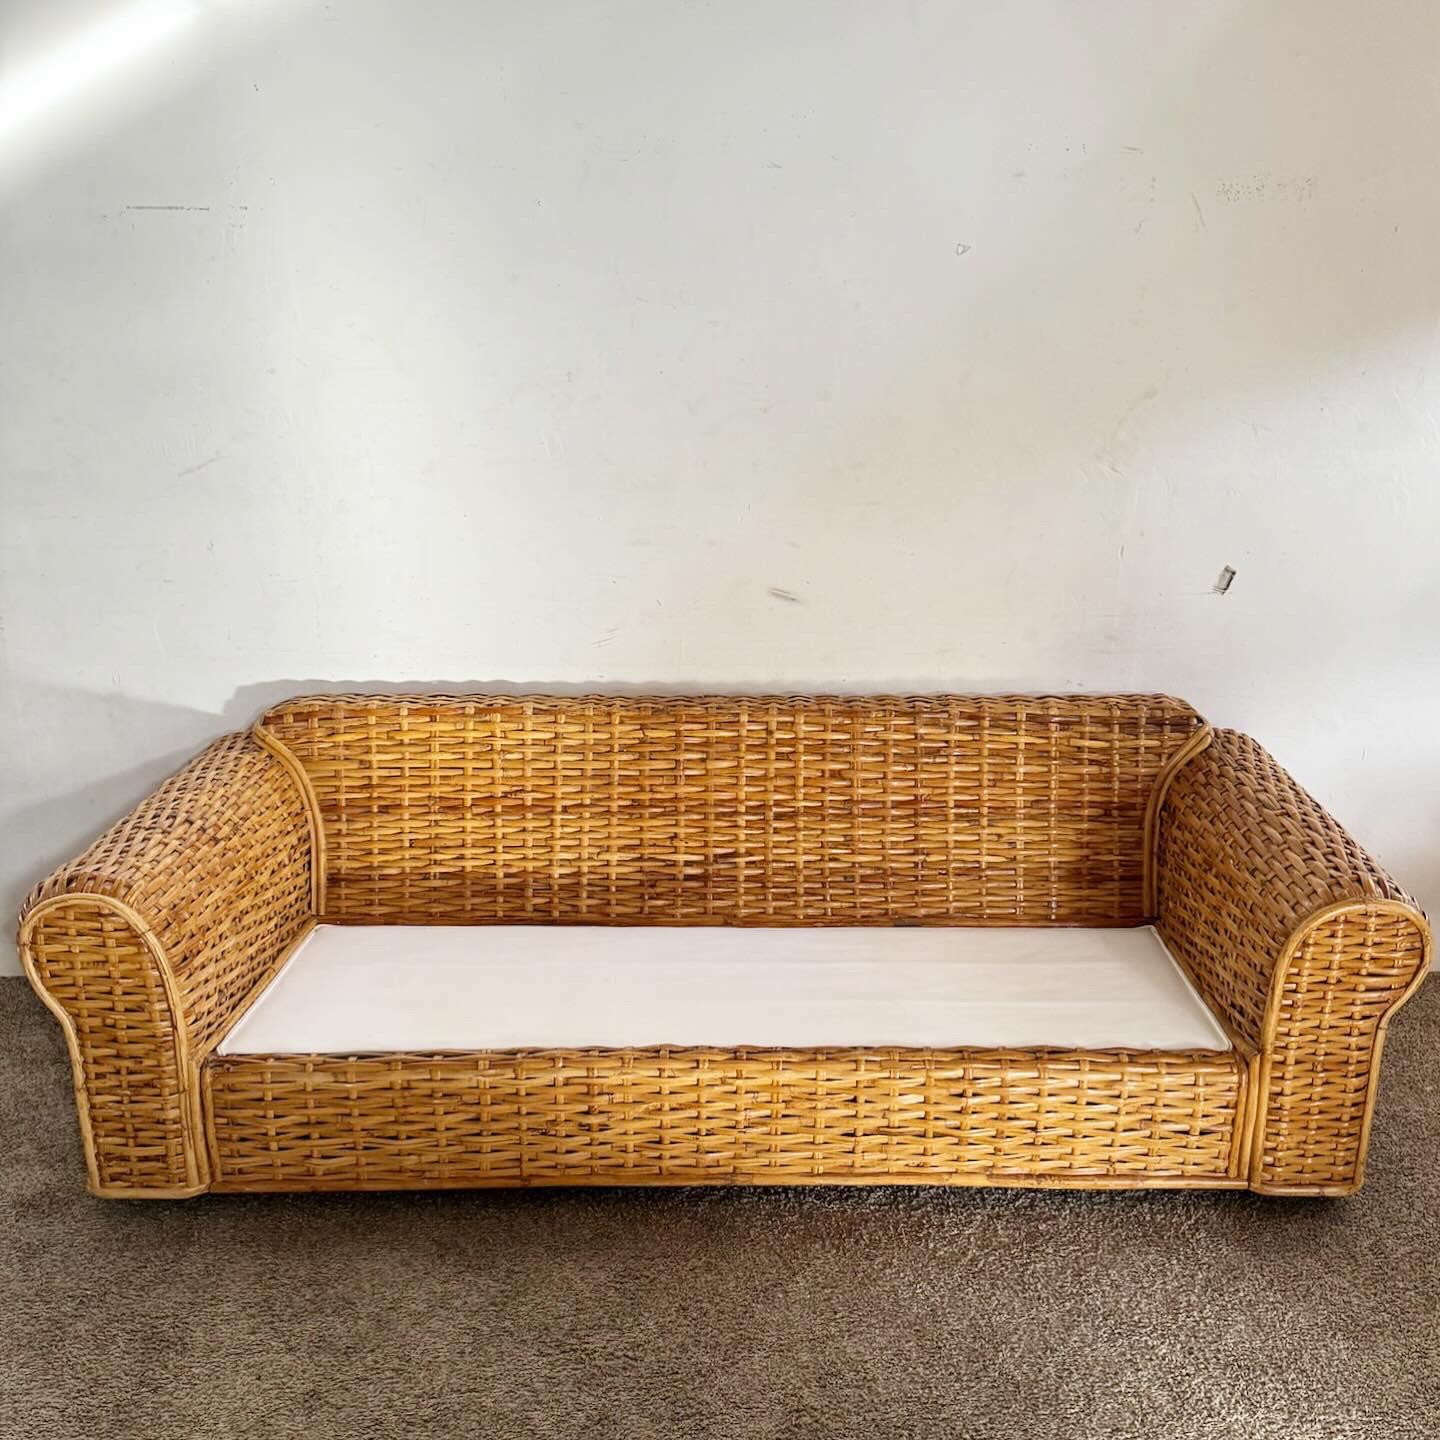 Boho Chic Wicker Sofa With White Cushions by Polo Ralph Lauren In Good Condition For Sale In Delray Beach, FL